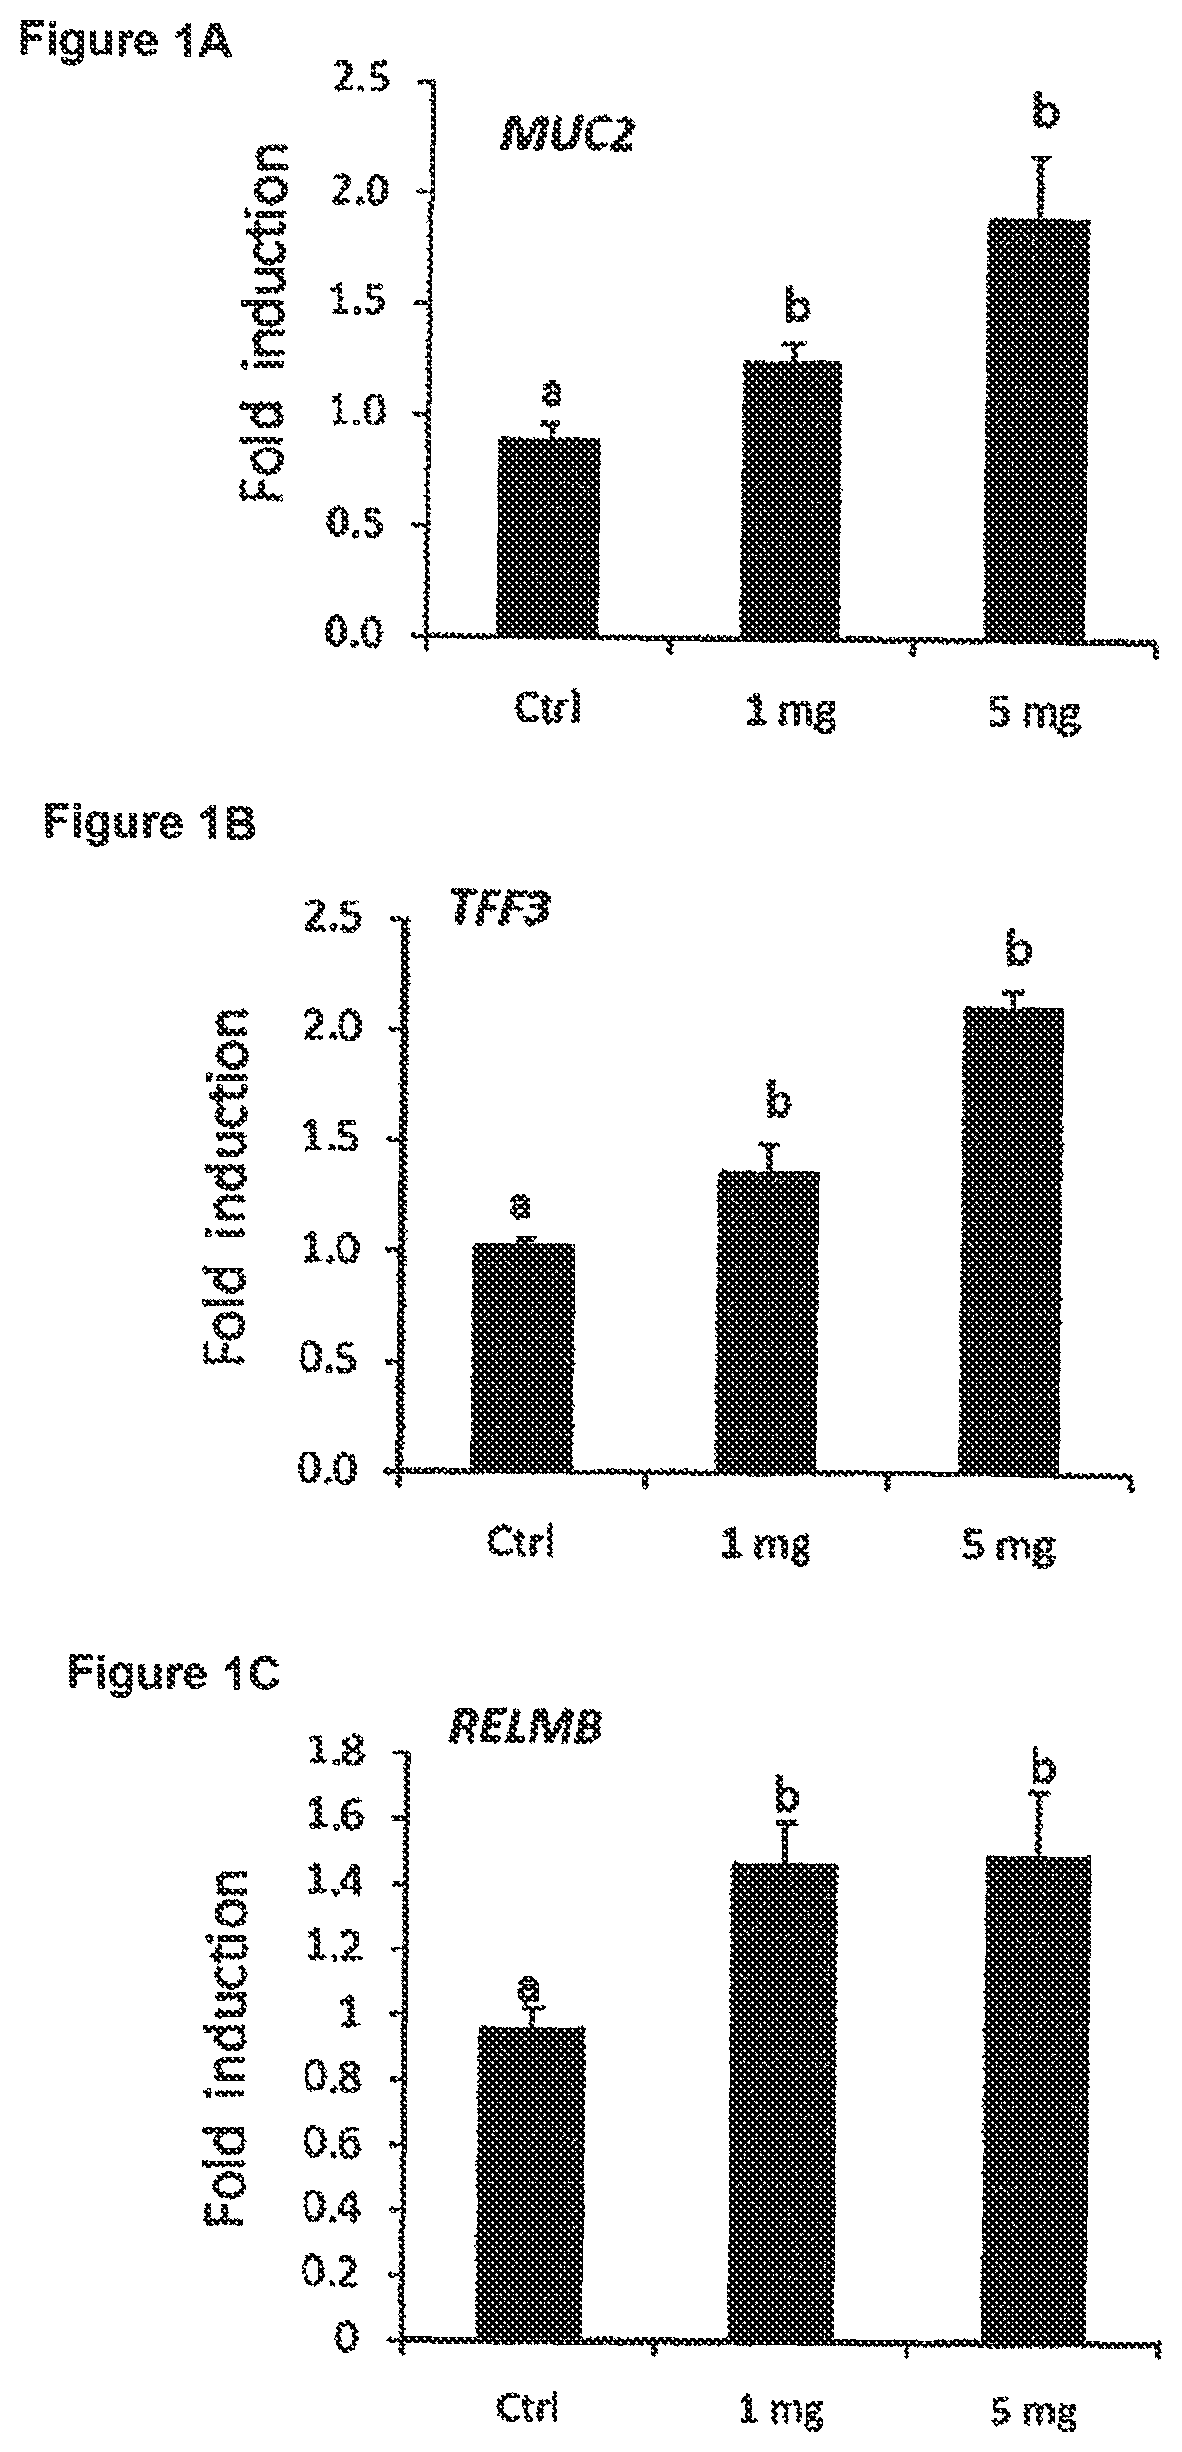 Human milk oligosaccharides for preventing injury and/or promoting healing of the gastrointestinal tract